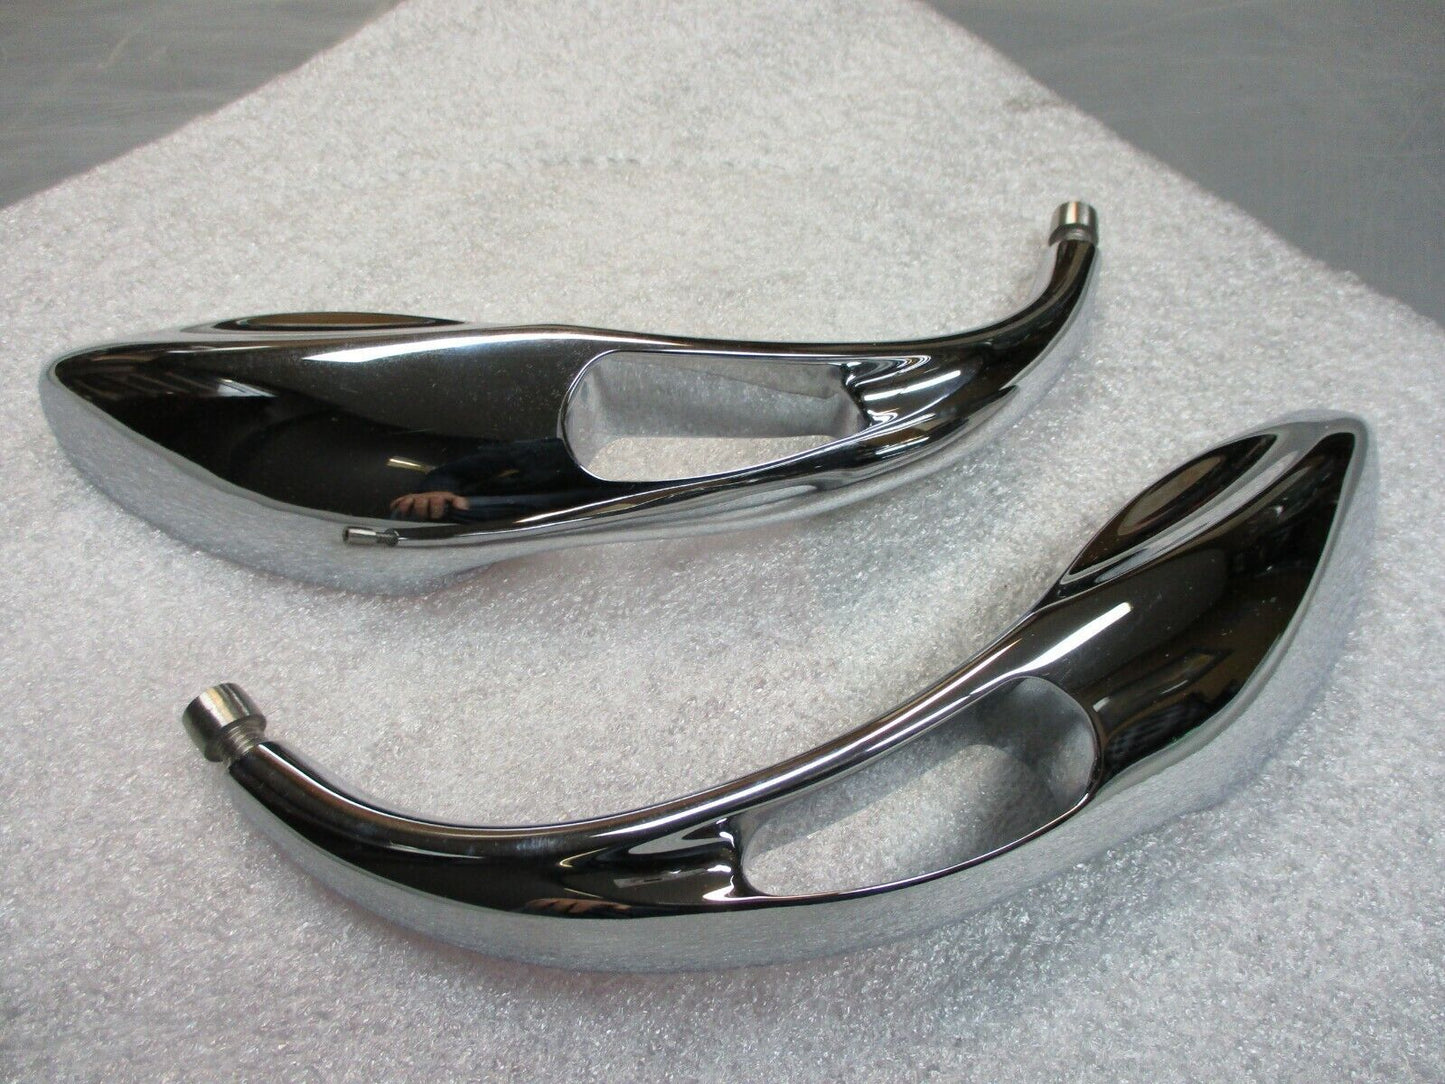 Apollo 13 Mirrors By Rebuffini Solid Chrome Billet 746712 fits Harley Davidson